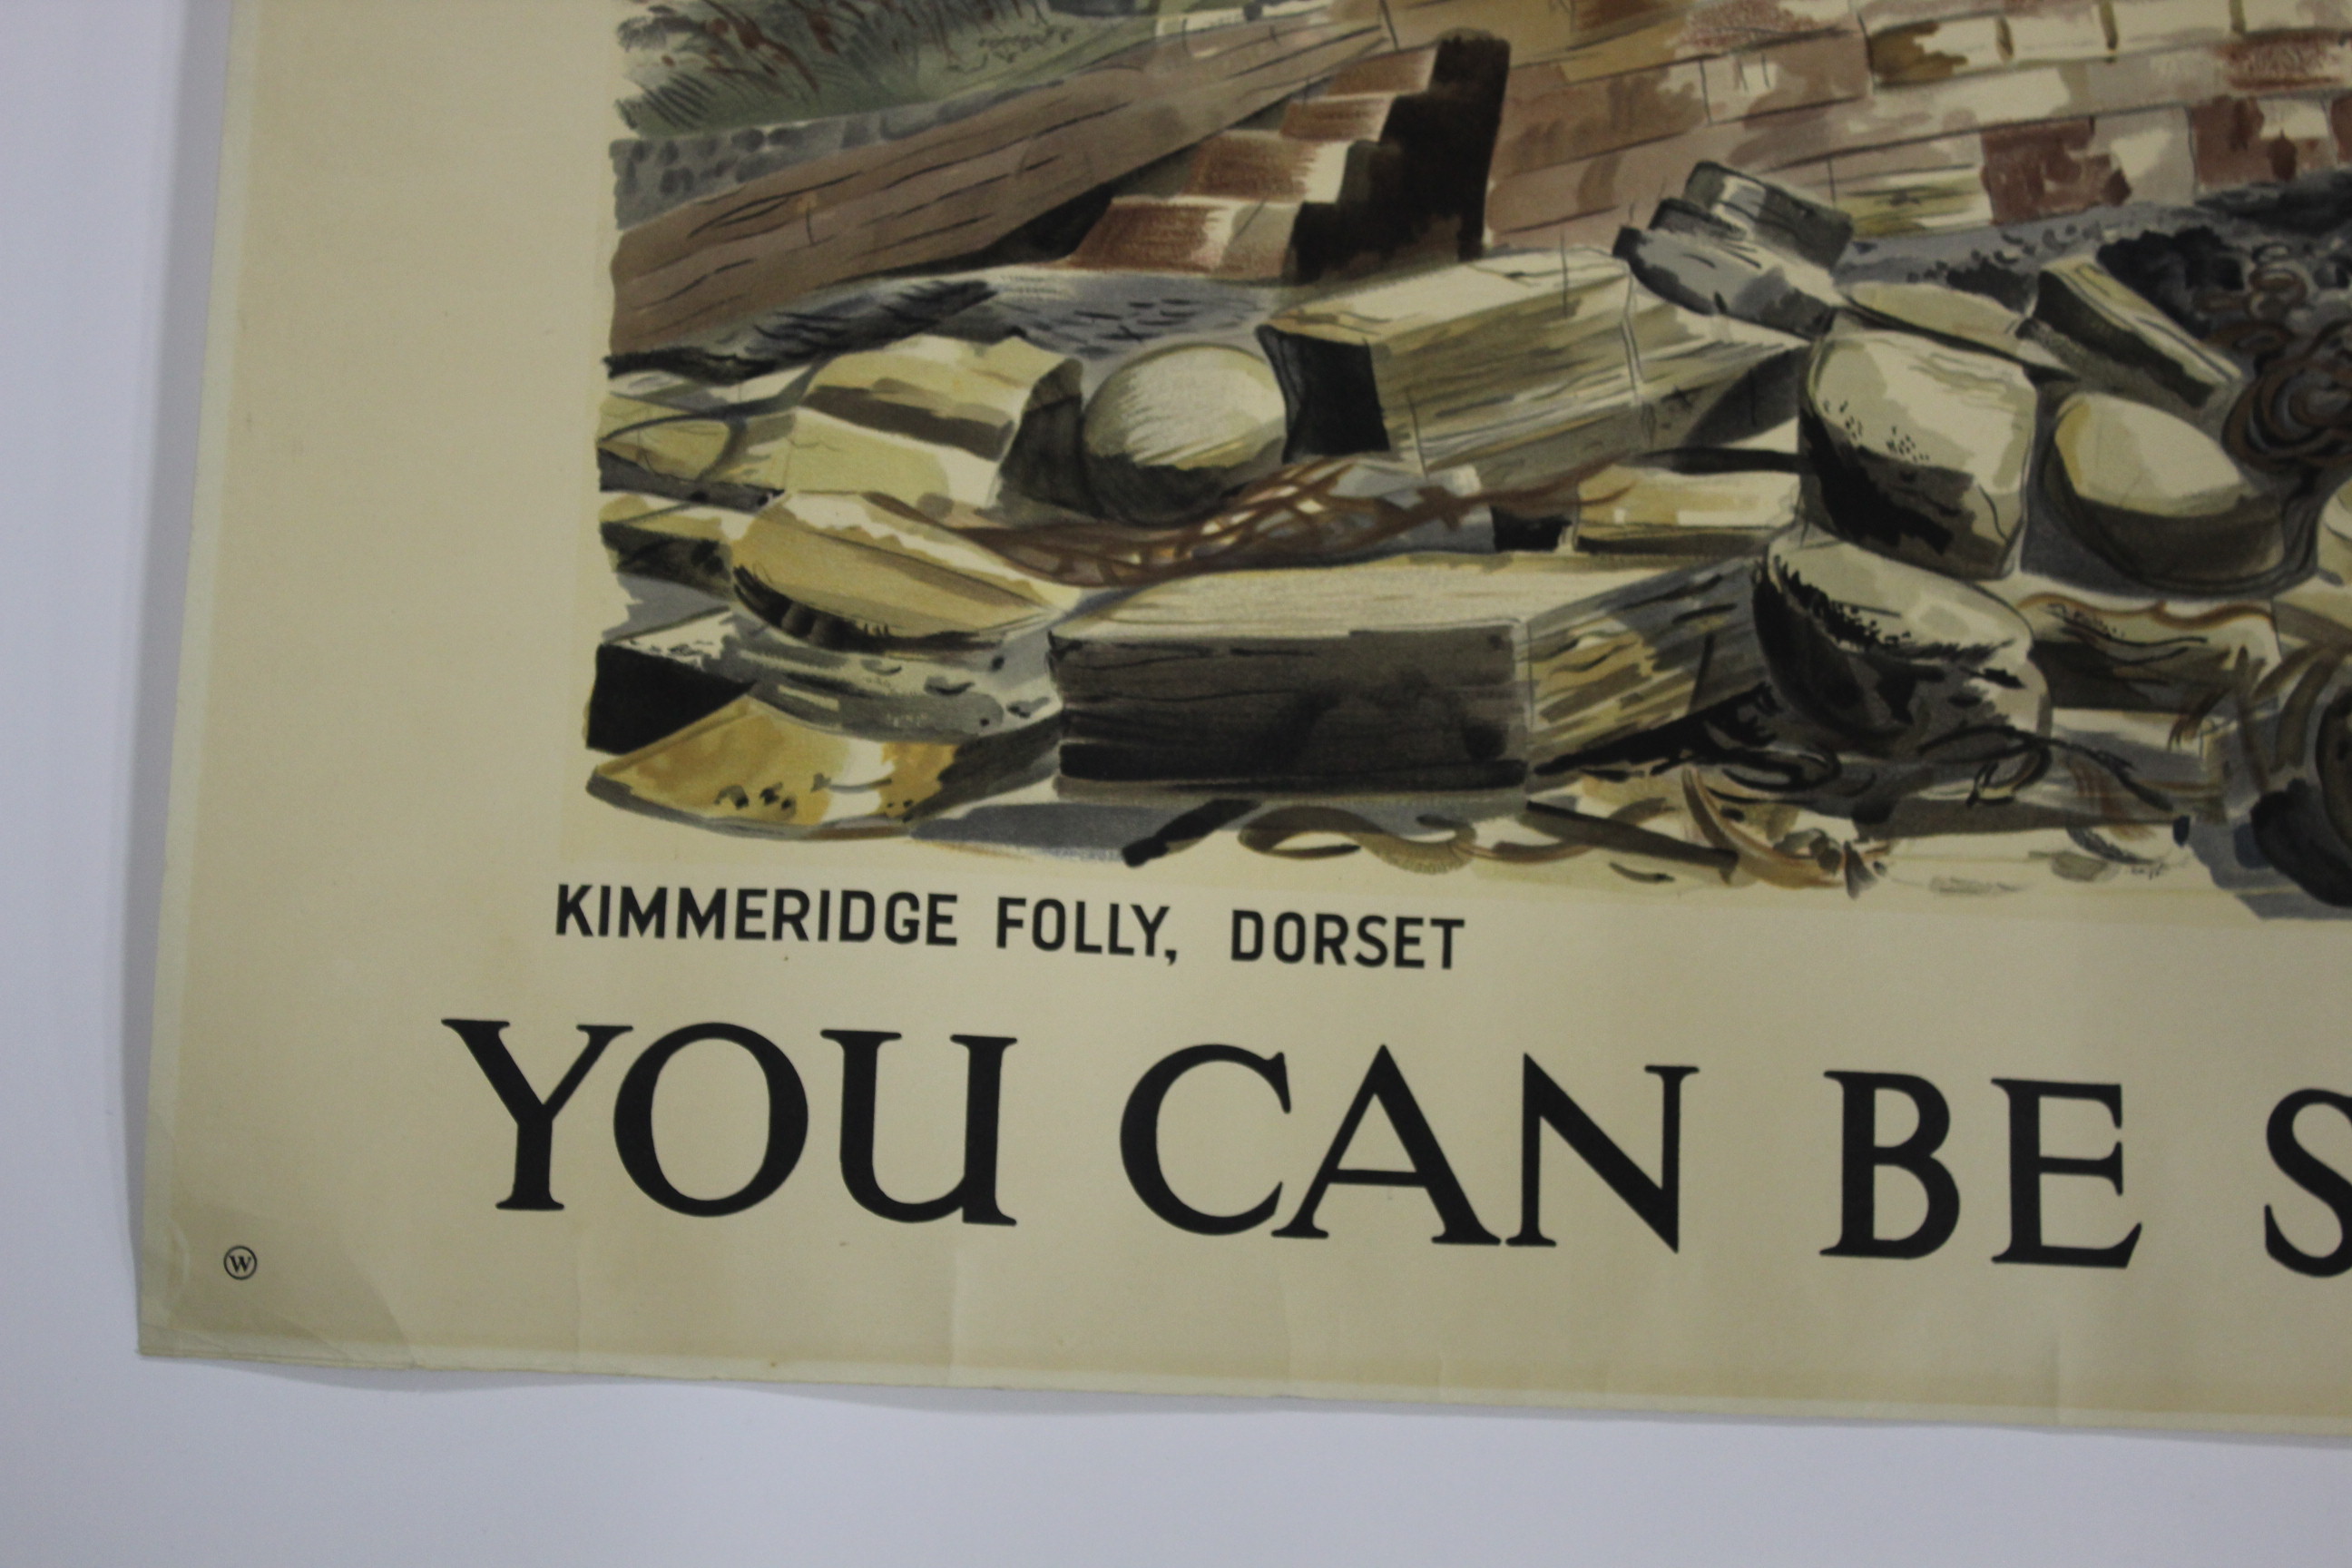 PAUL NASH (1889-1946) - SHELL POSTER 'KIMMERIDGE FOLLY', DORSET a rare lithograph in colours of - Image 3 of 7